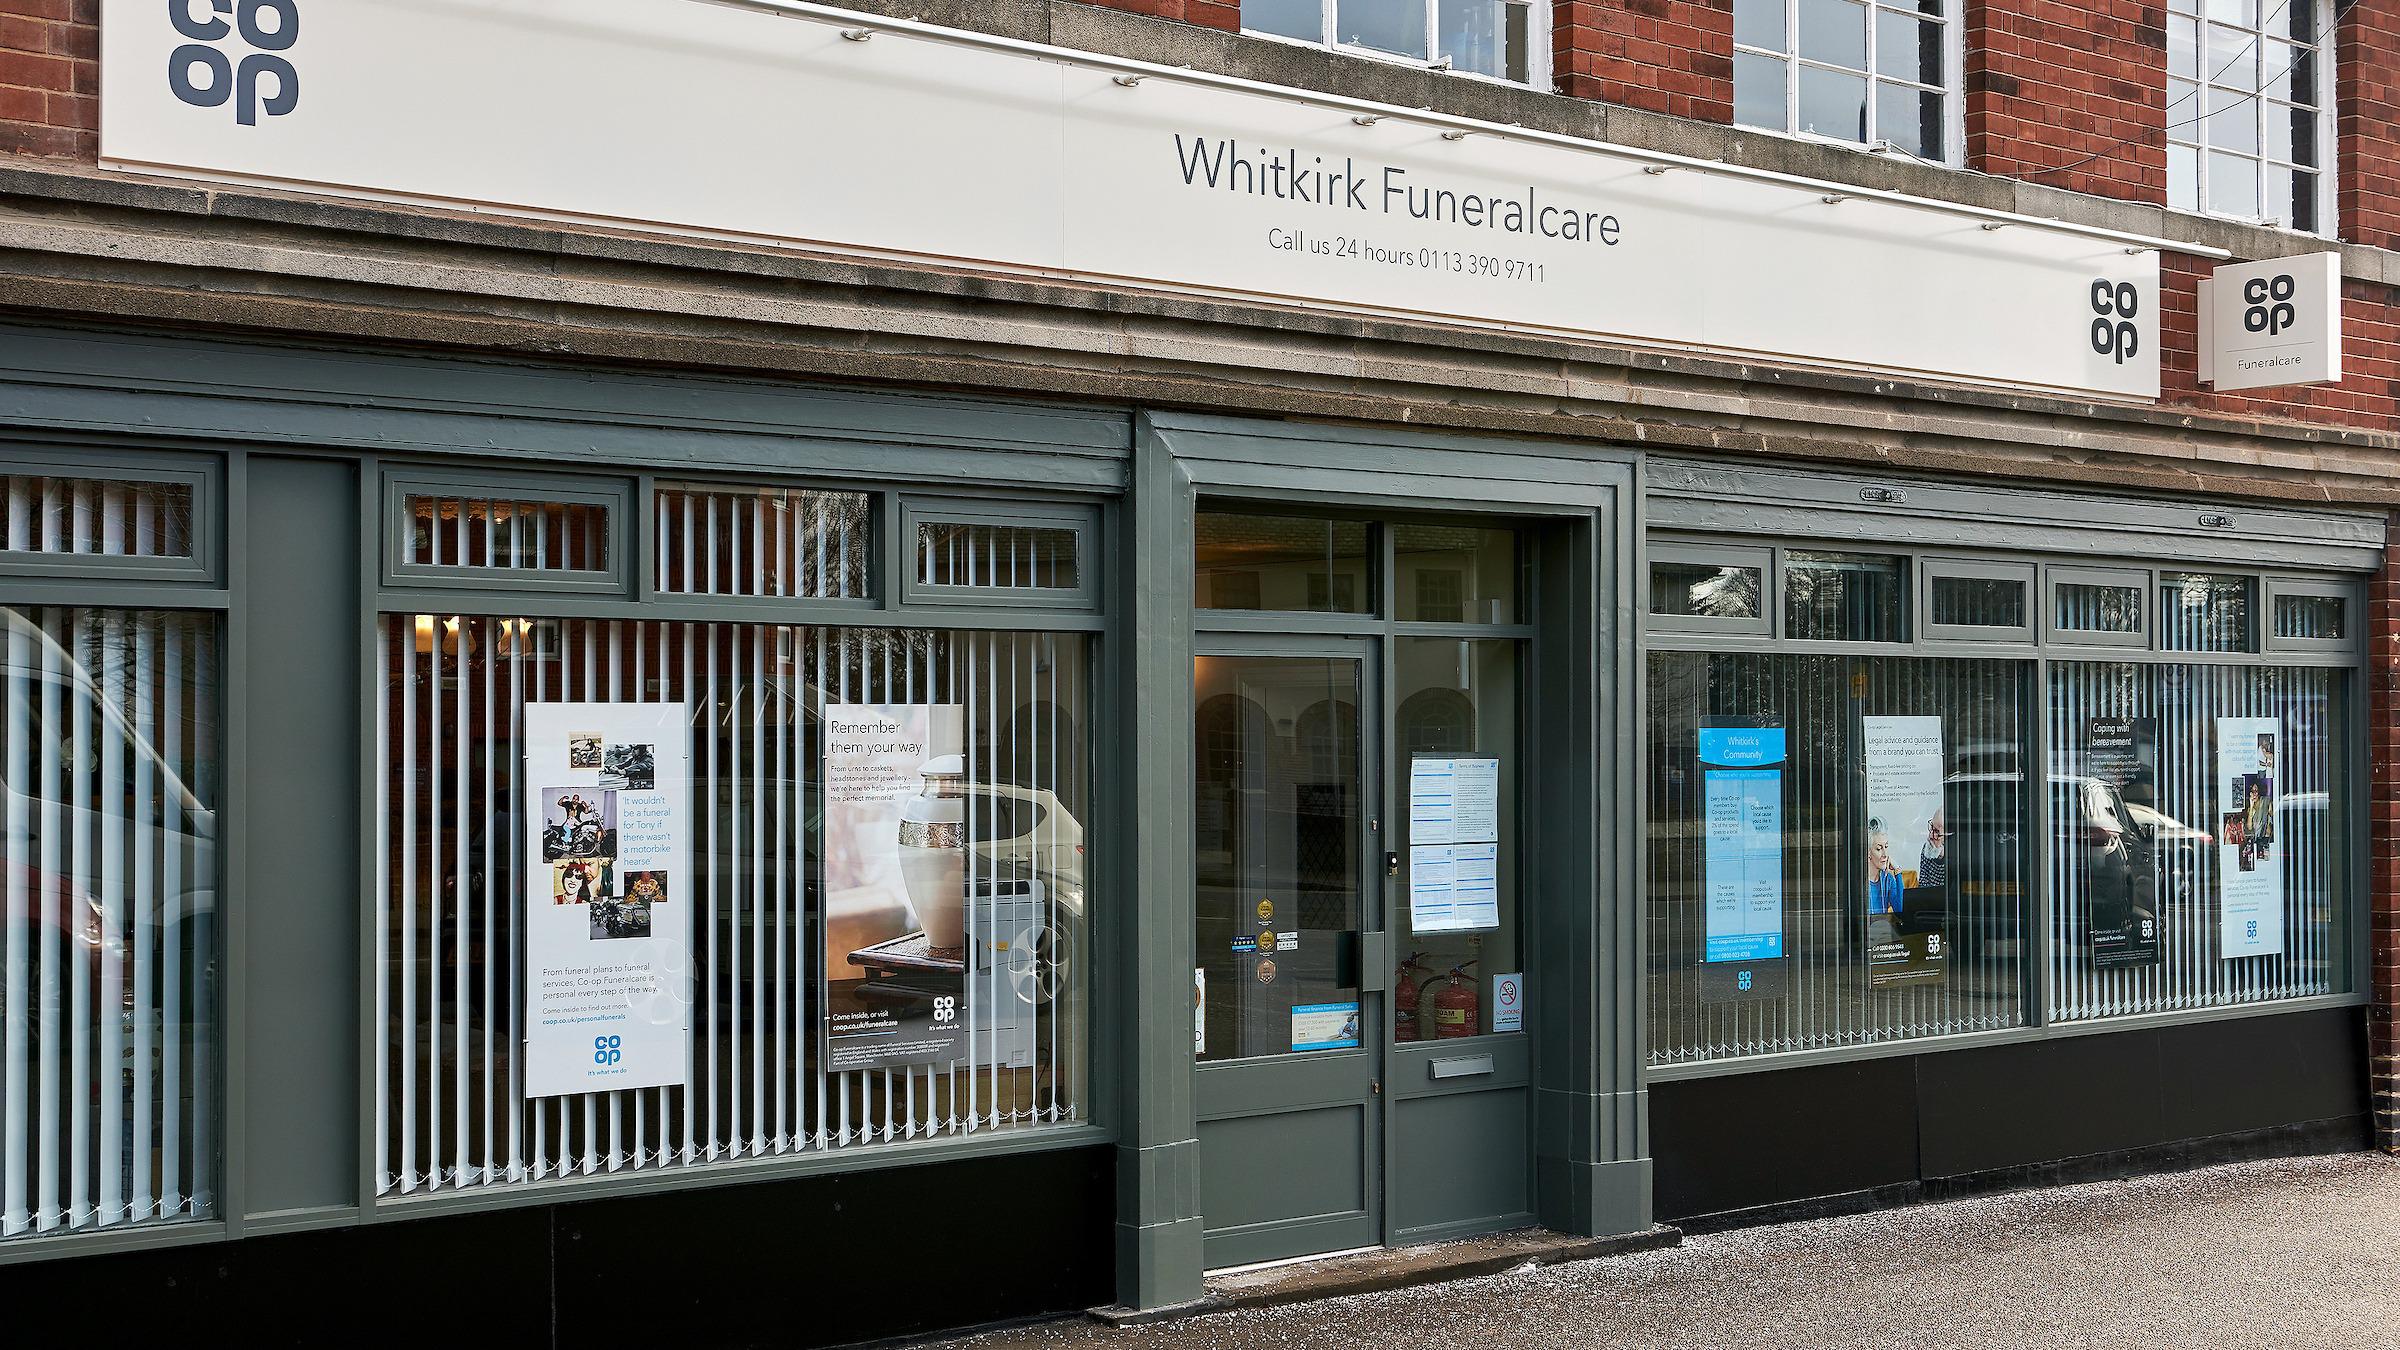 Images Co-op Funeralcare, Whitkirk